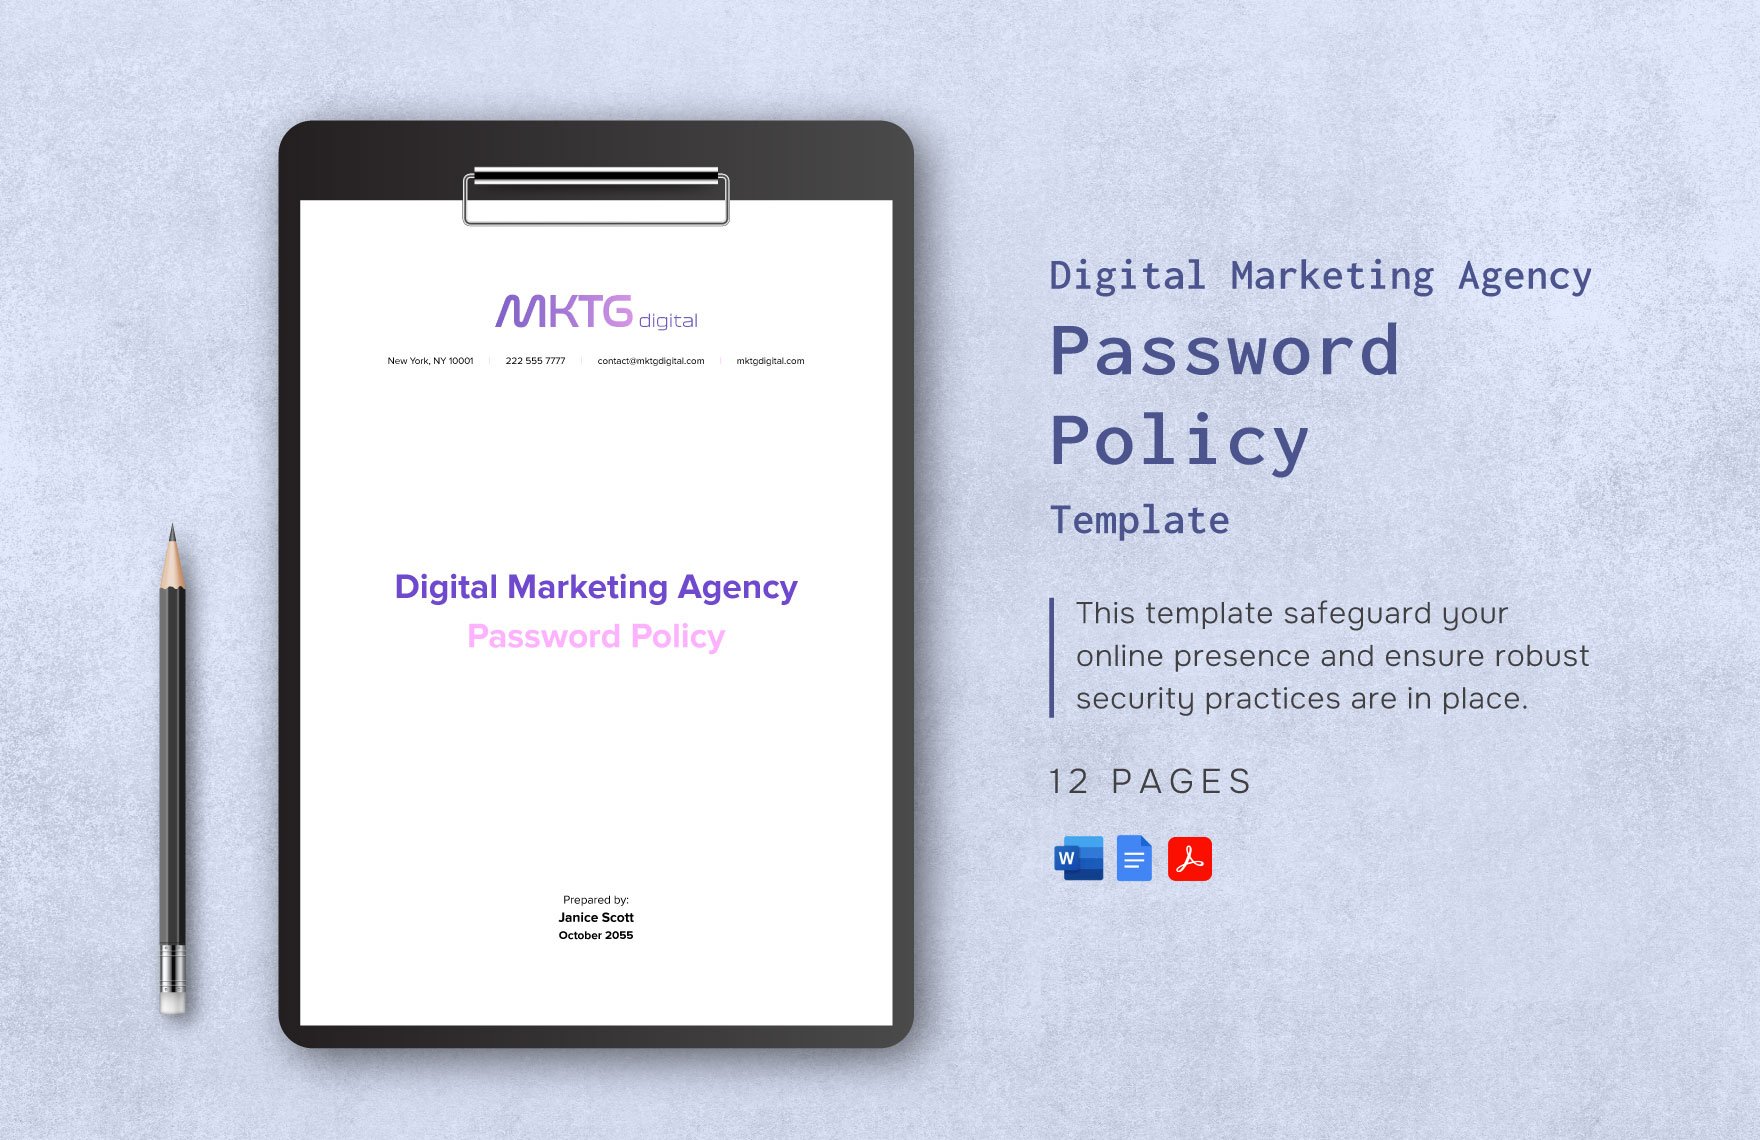 Digital Marketing Agency Password Policy Template in Word, Google Docs, PDF